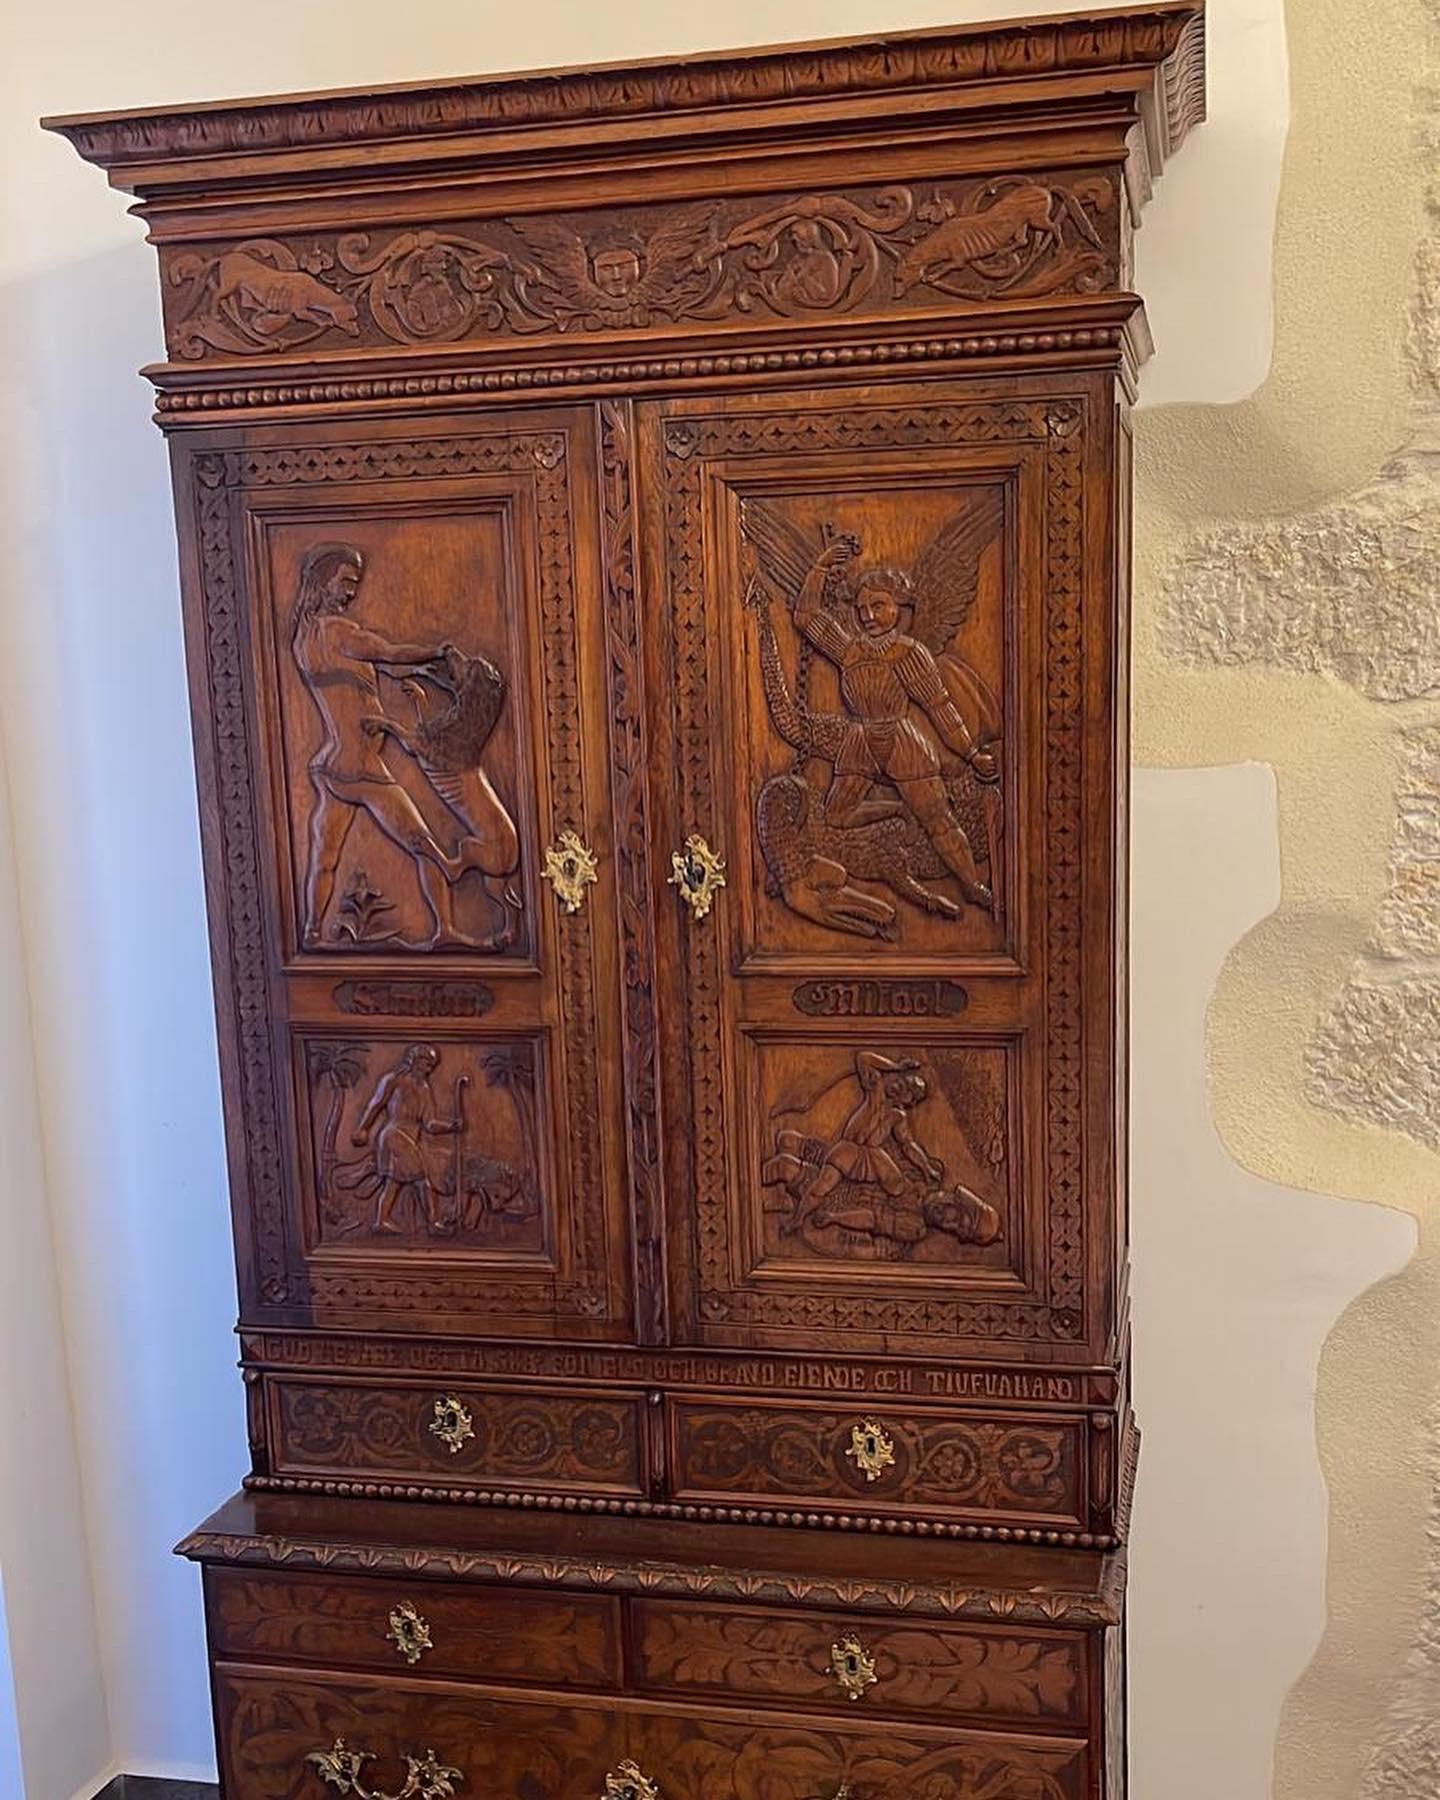 Amazing carved cabinet, in two parts, doors above and drawers below. Late 19th century, Neo-Renaissance period, made of oak wood, fully decorated on all surfaces with fine carvings of scenes with characters and floral motifs.
Inside the doors is